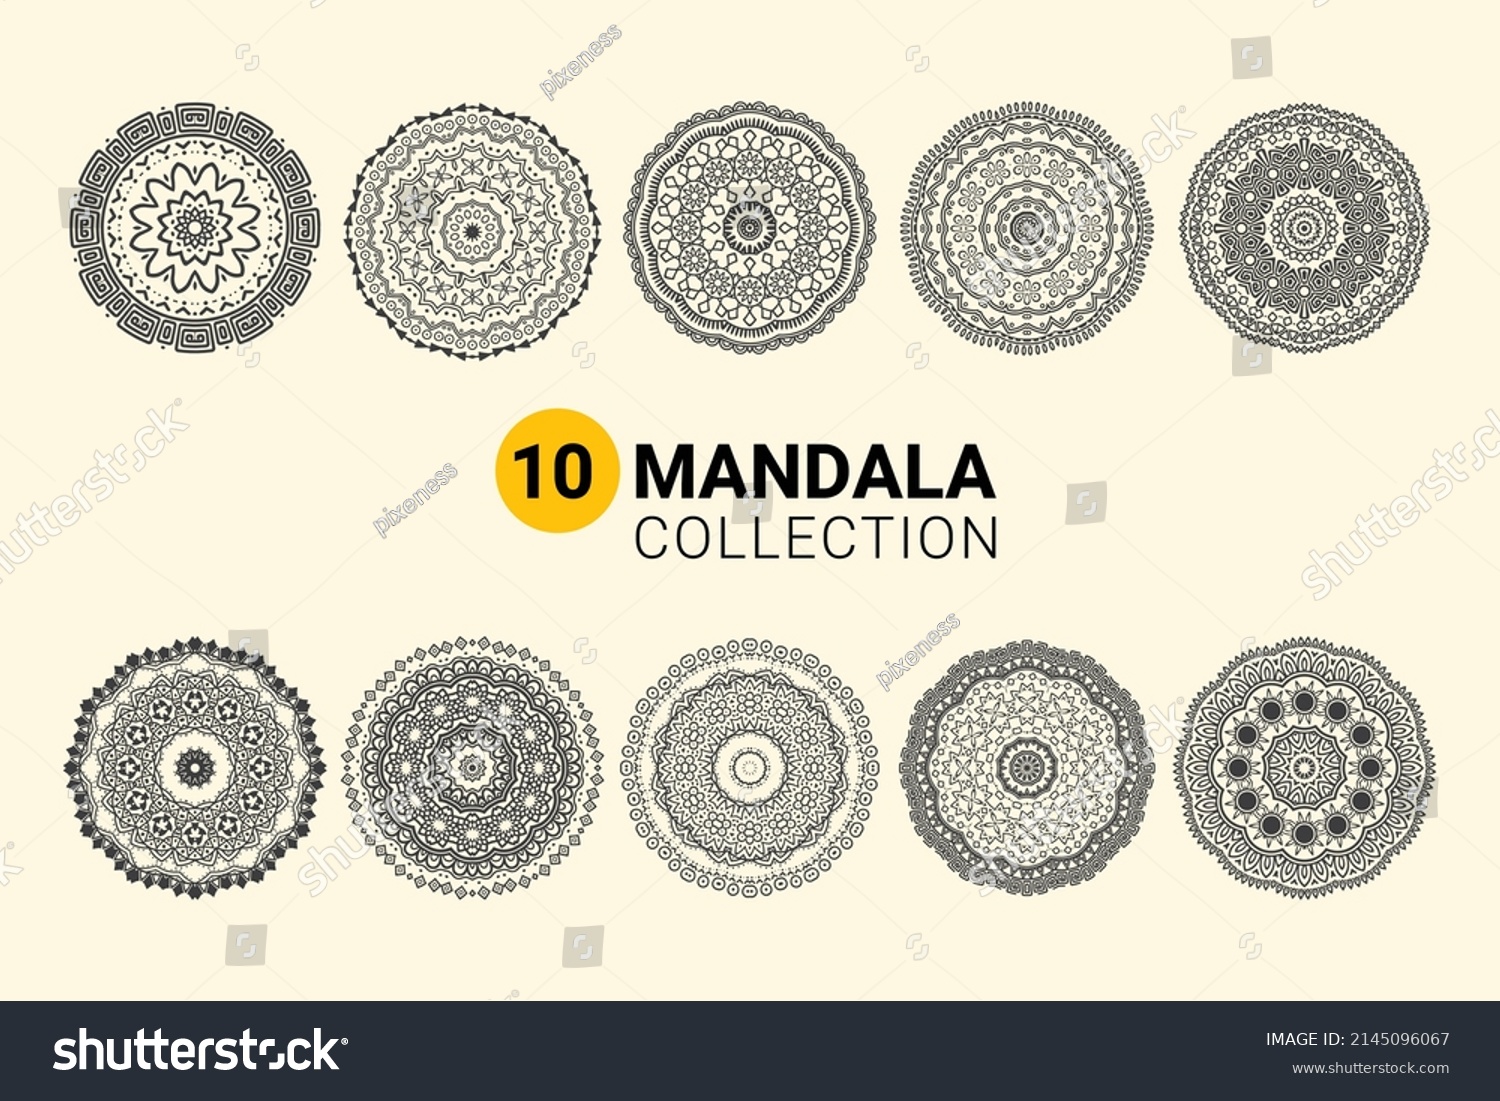 SVG of Mandala Coloring Book for Kdp Interior, Ornamental luxury mandala pattern, Outline collection of abstract yoga symbol, Set of hand drawing zentangle mandala elements svg